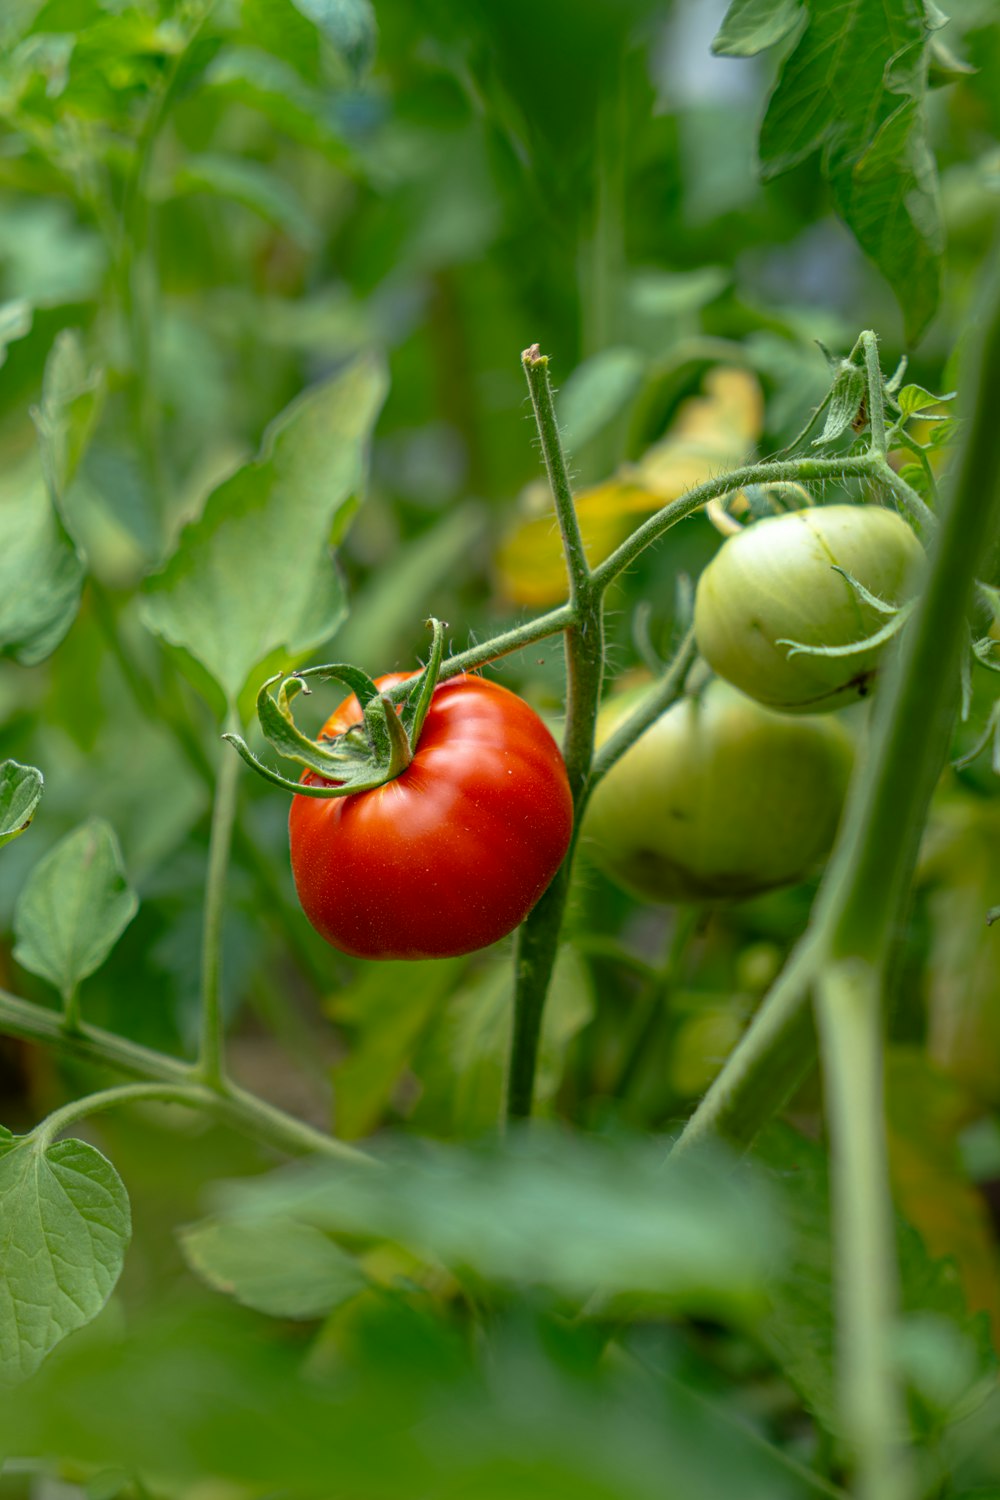 a close up of a tomato growing on a plant